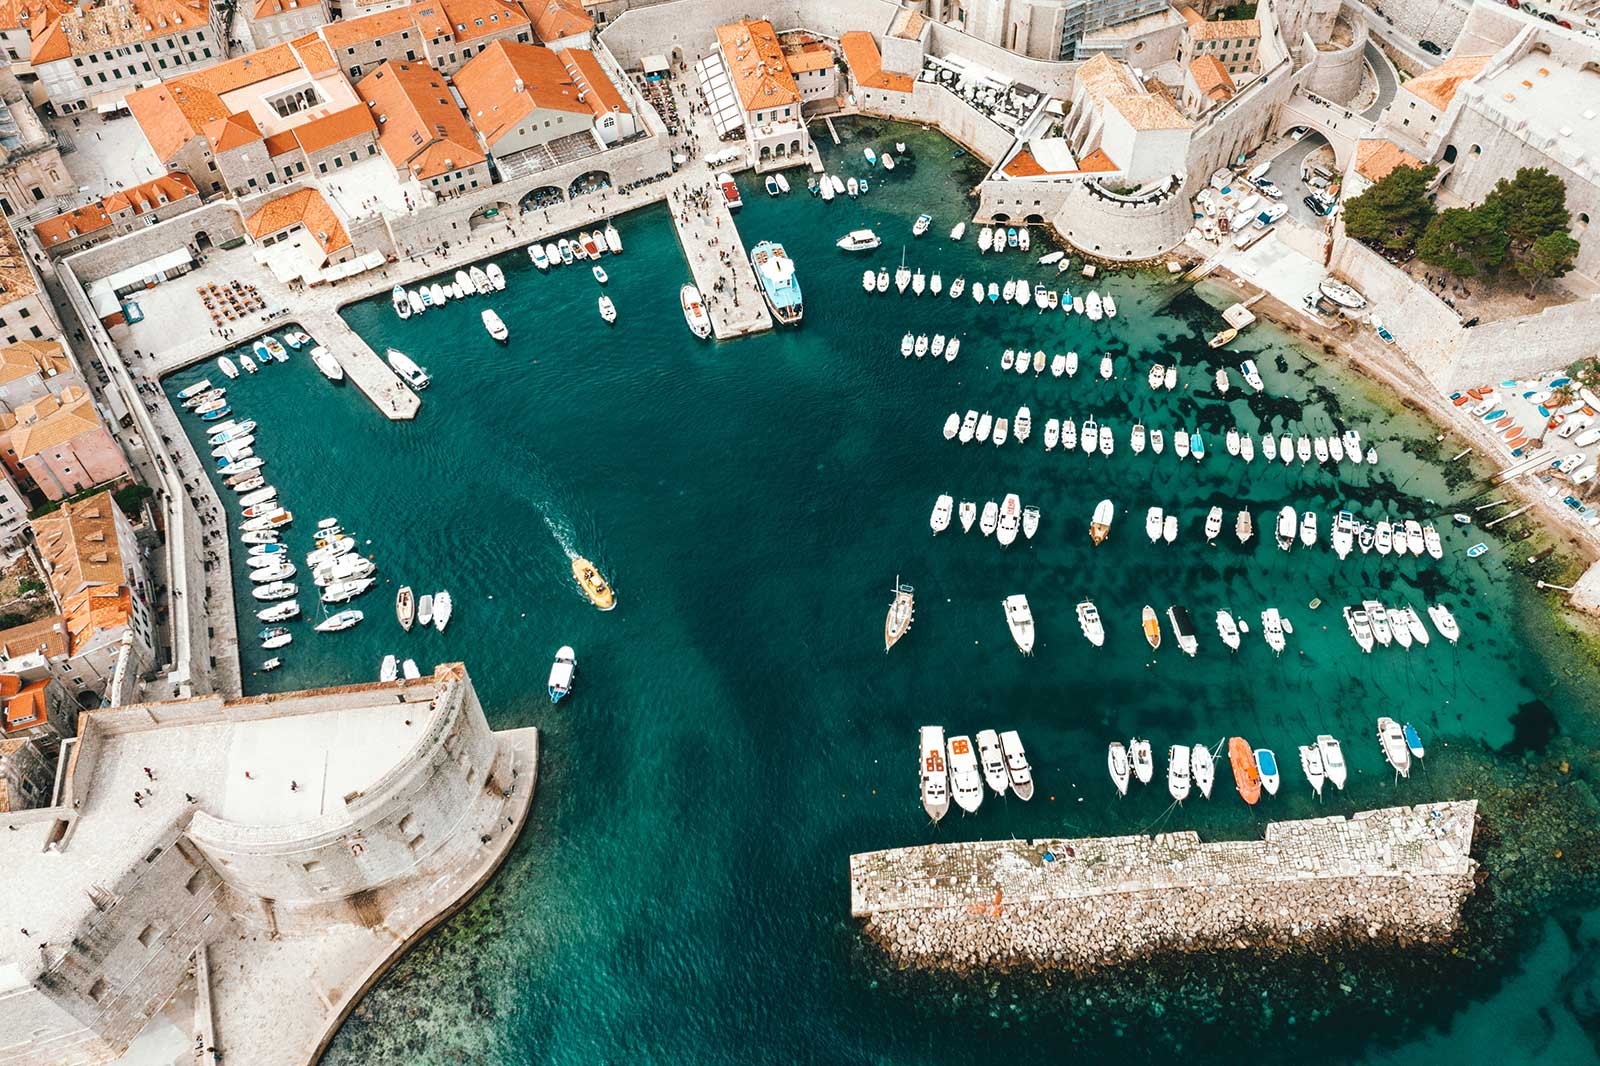 Dubrovnik City Break: Tips for Planning the Perfect Trip